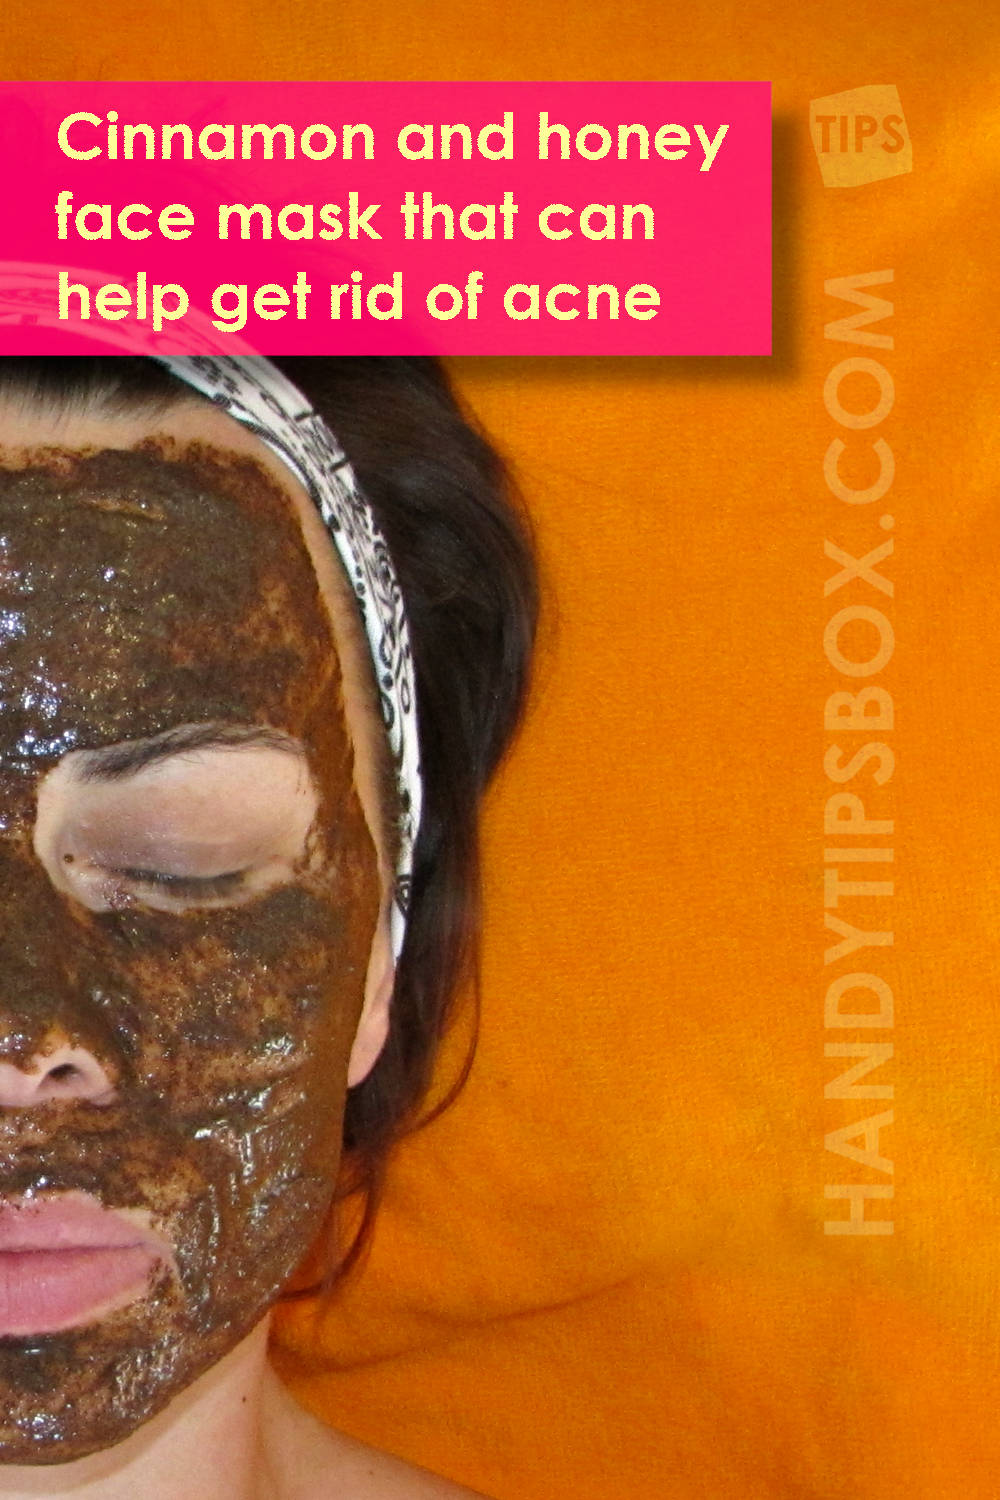 The homemade cinnamon and honey face mask that can help get rid of acne. Application demo. Vertical image.